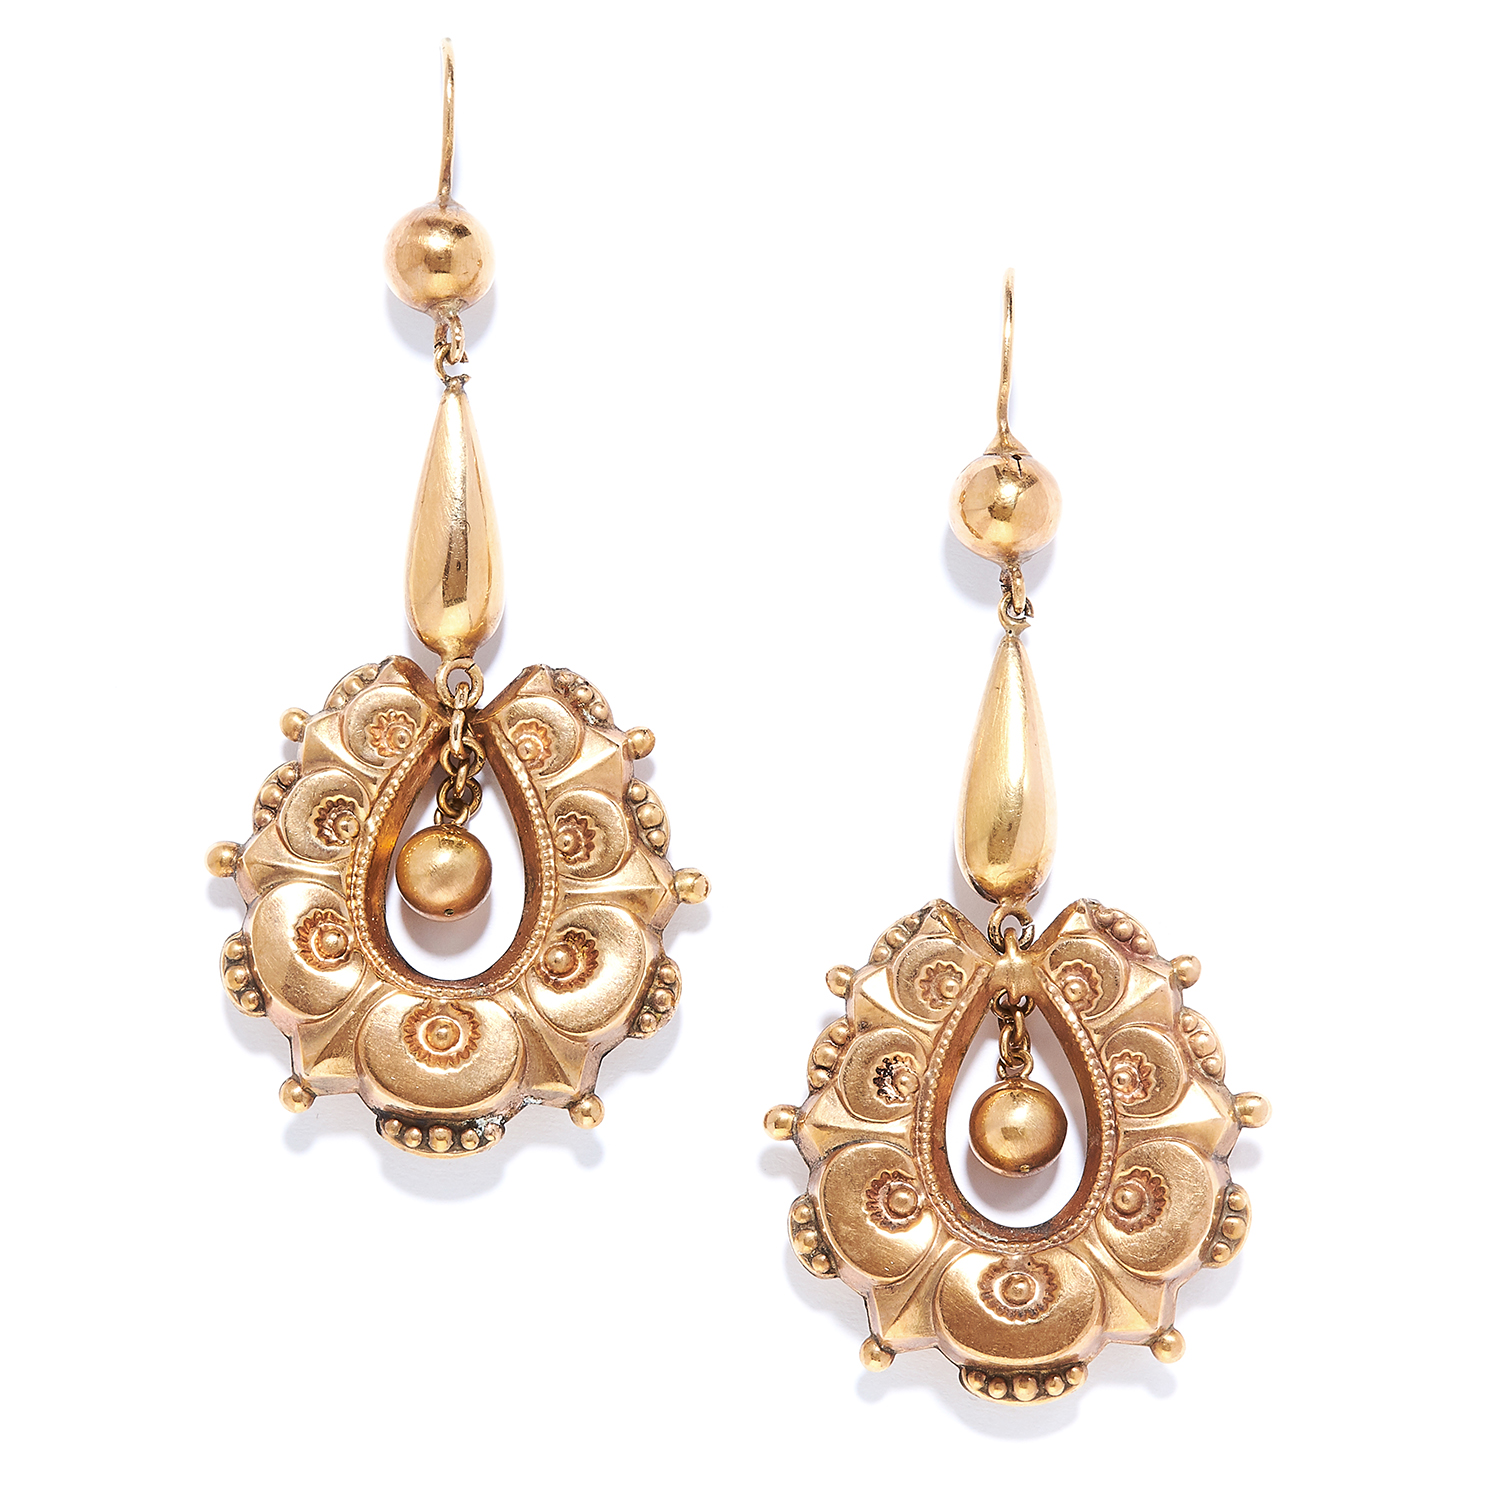 ANTIQUE ARTICULATED GOLD EARRINGS, 19TH CENTURY in yellow gold, each suspending a gold bead within a